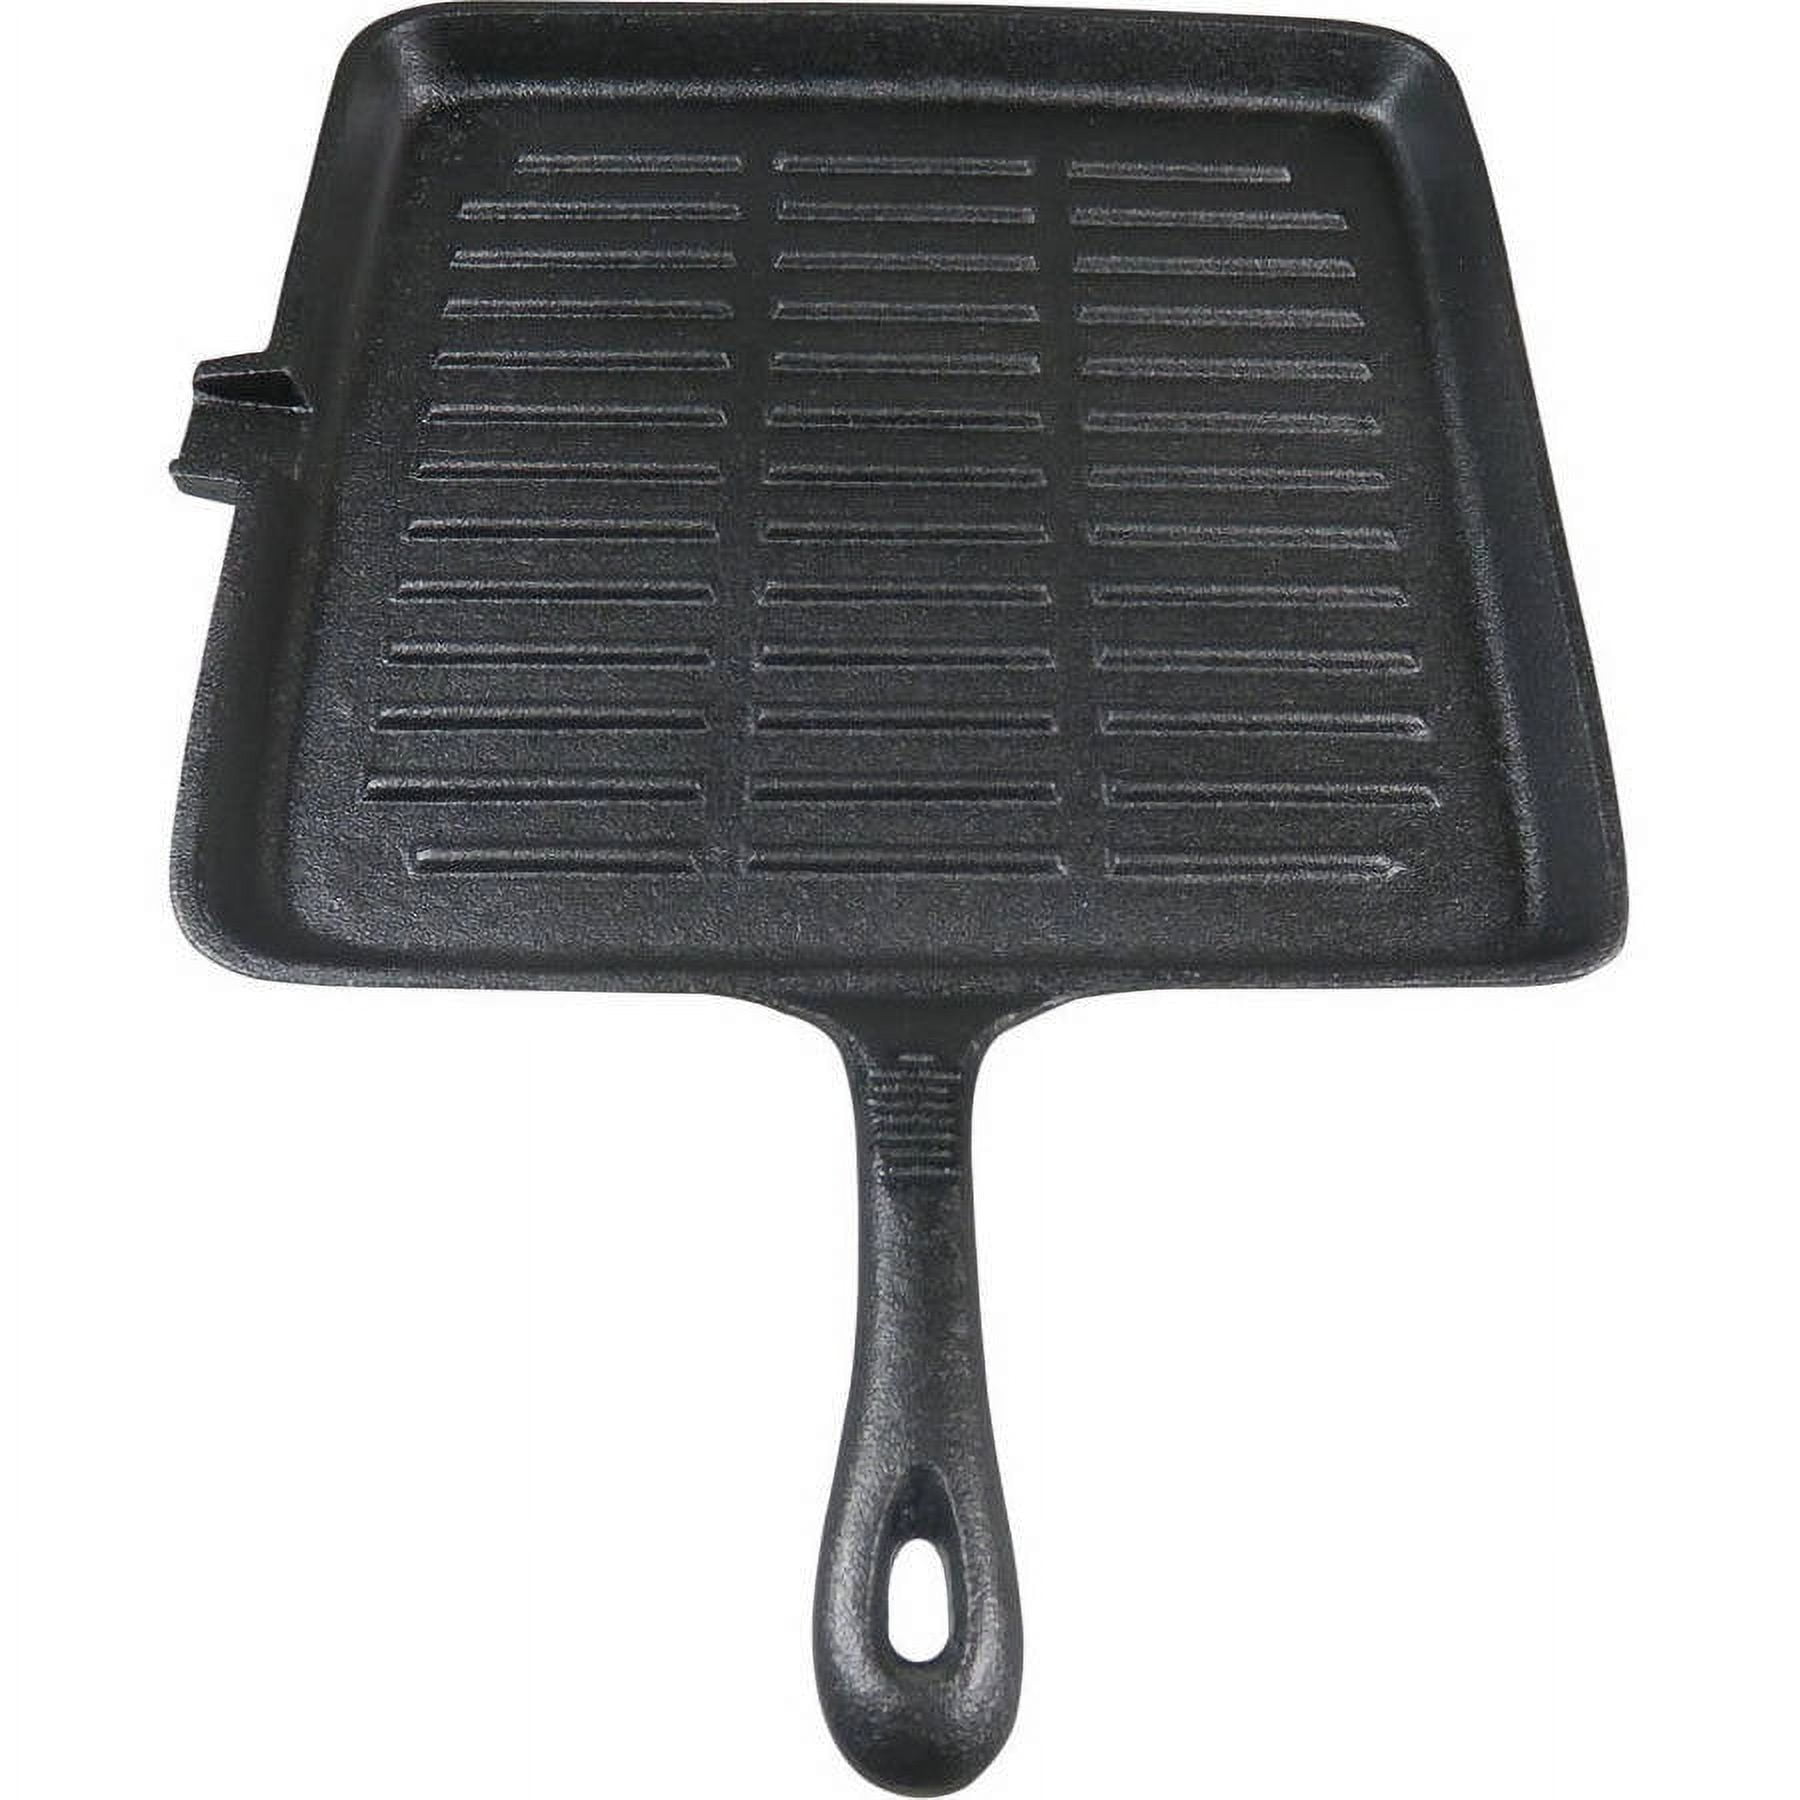 Starcraft 9 in. Cast Iron Rectangular Grill and Griddle Pan